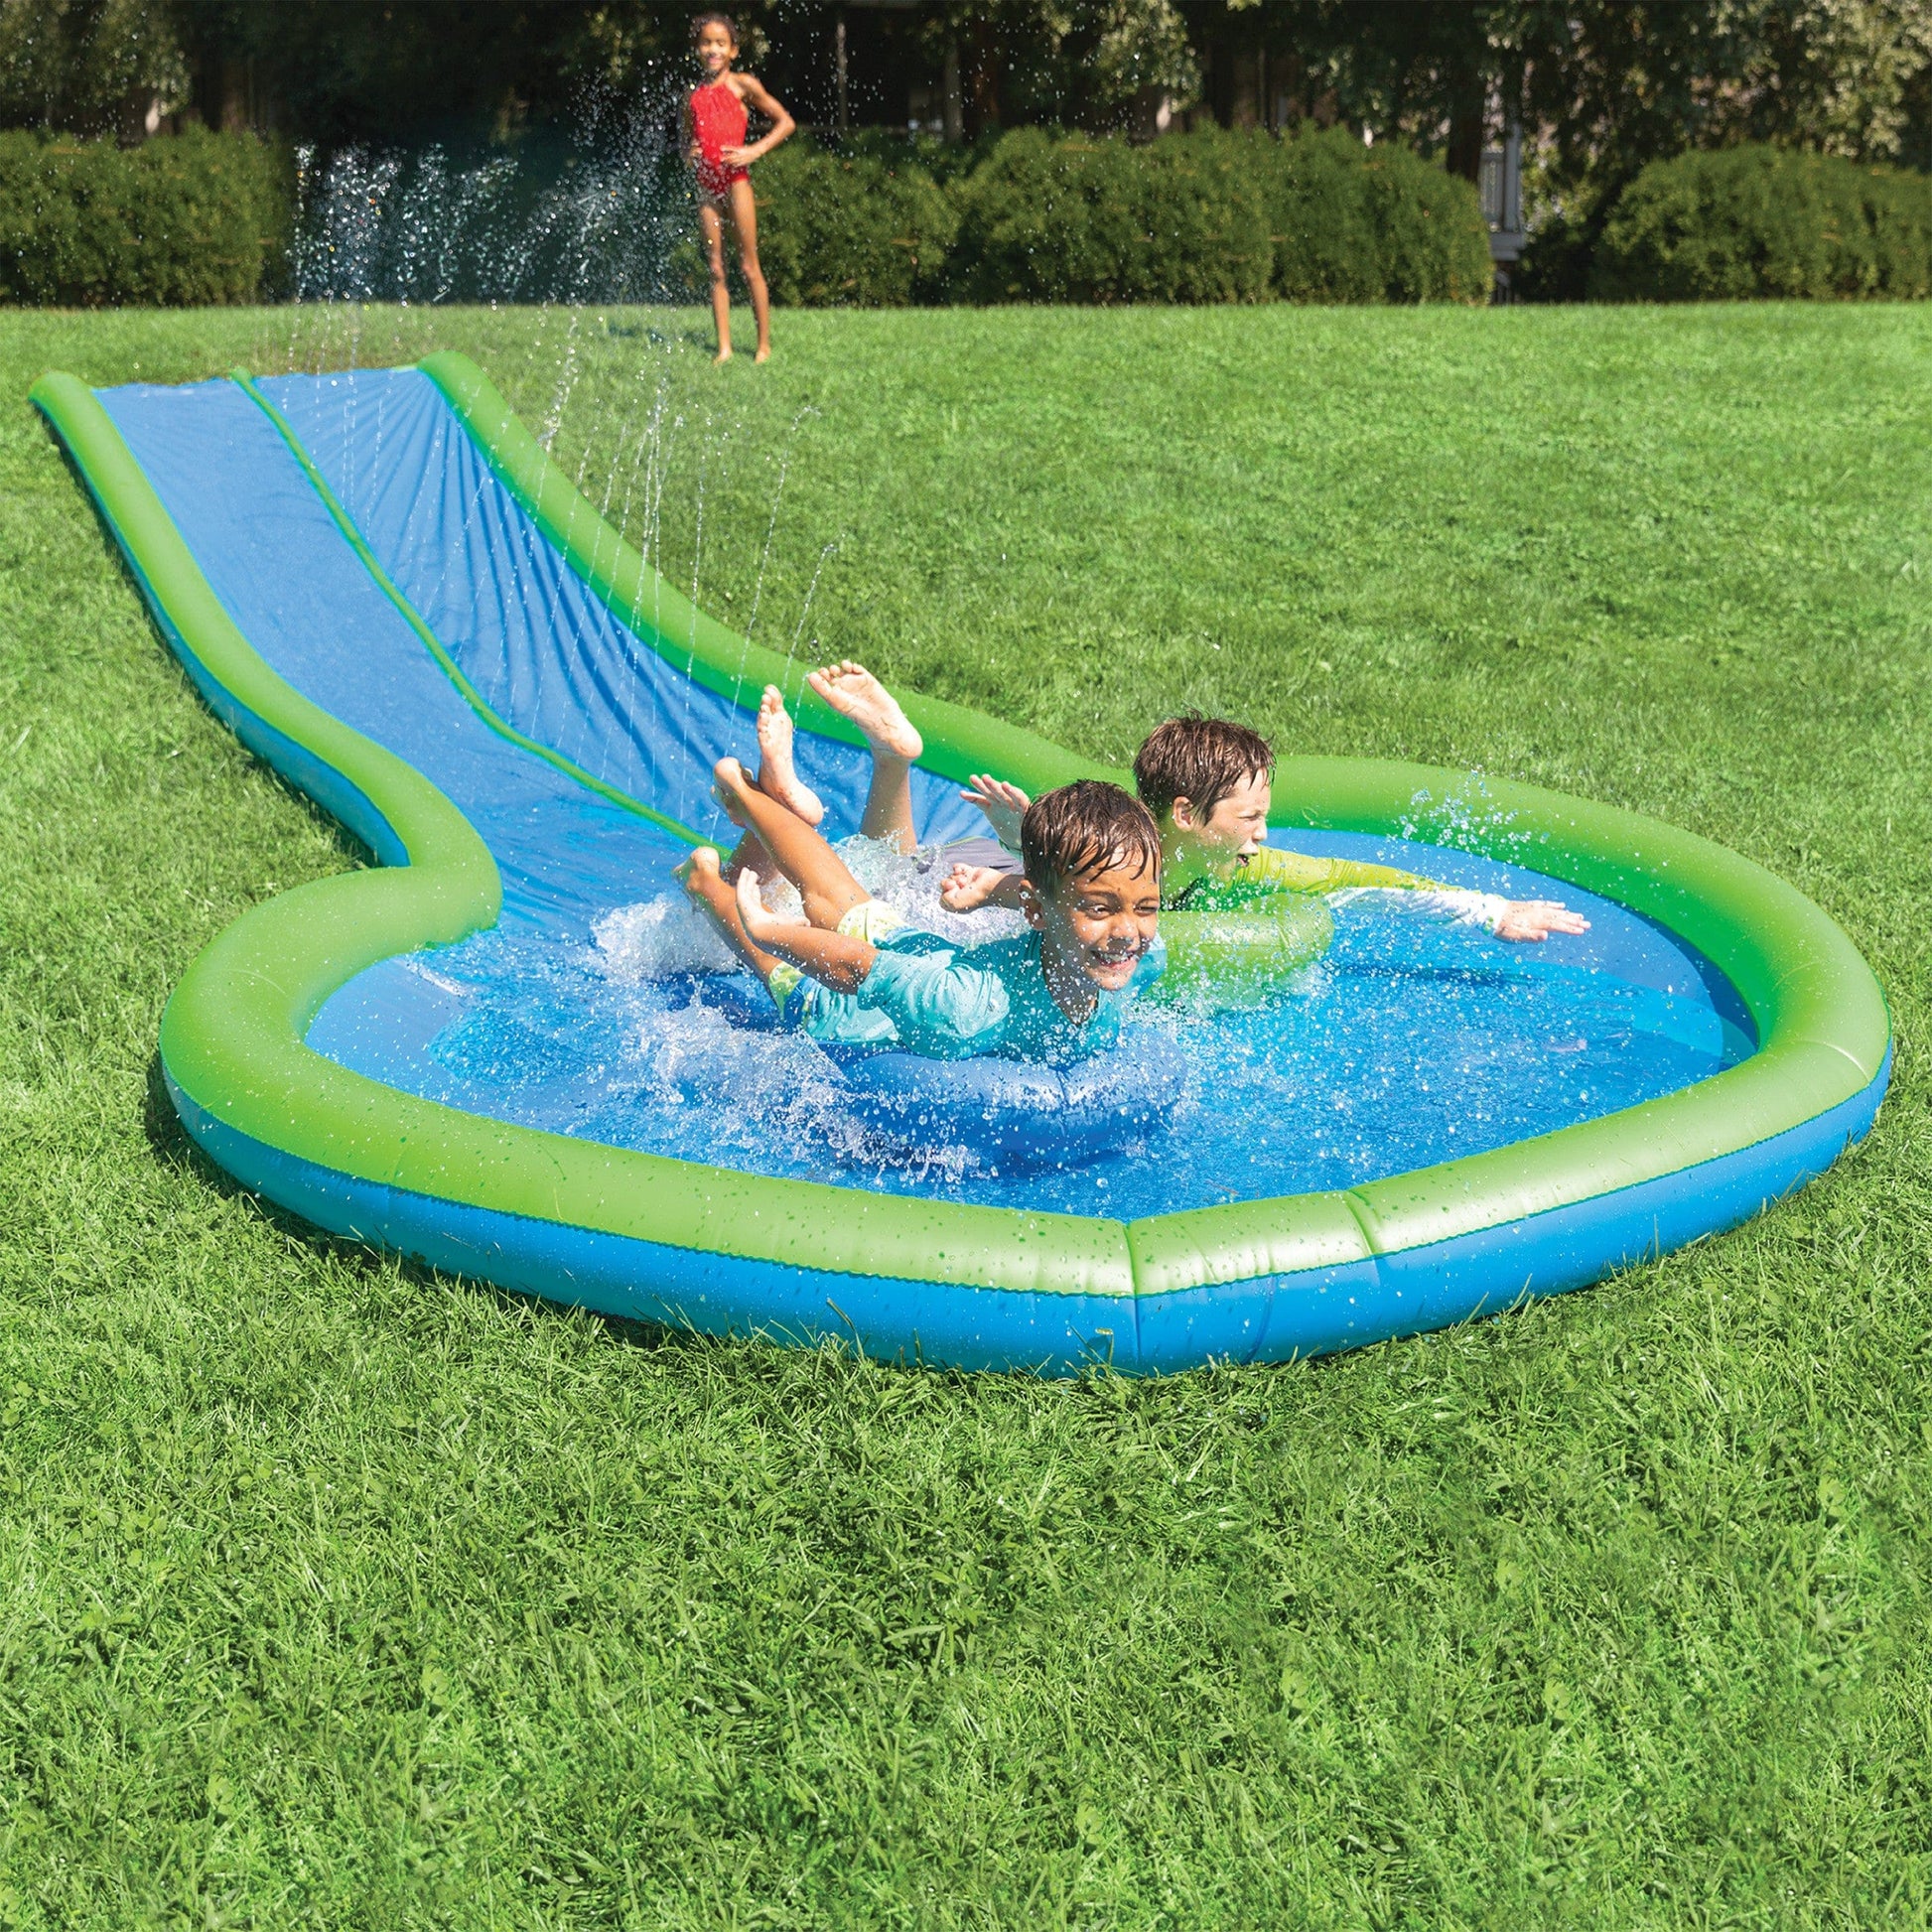  Inflatable Water Slides for Kids - Backyard Inflatable